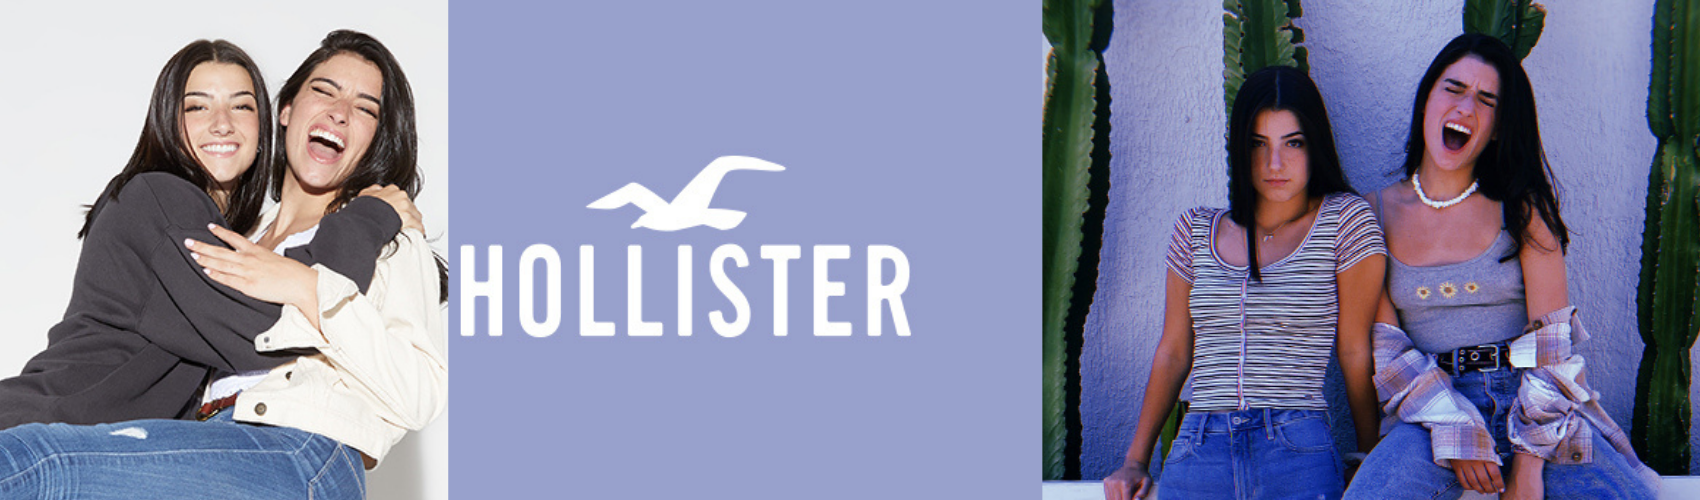 Hollister Hoodie - Hollister Clothing Store